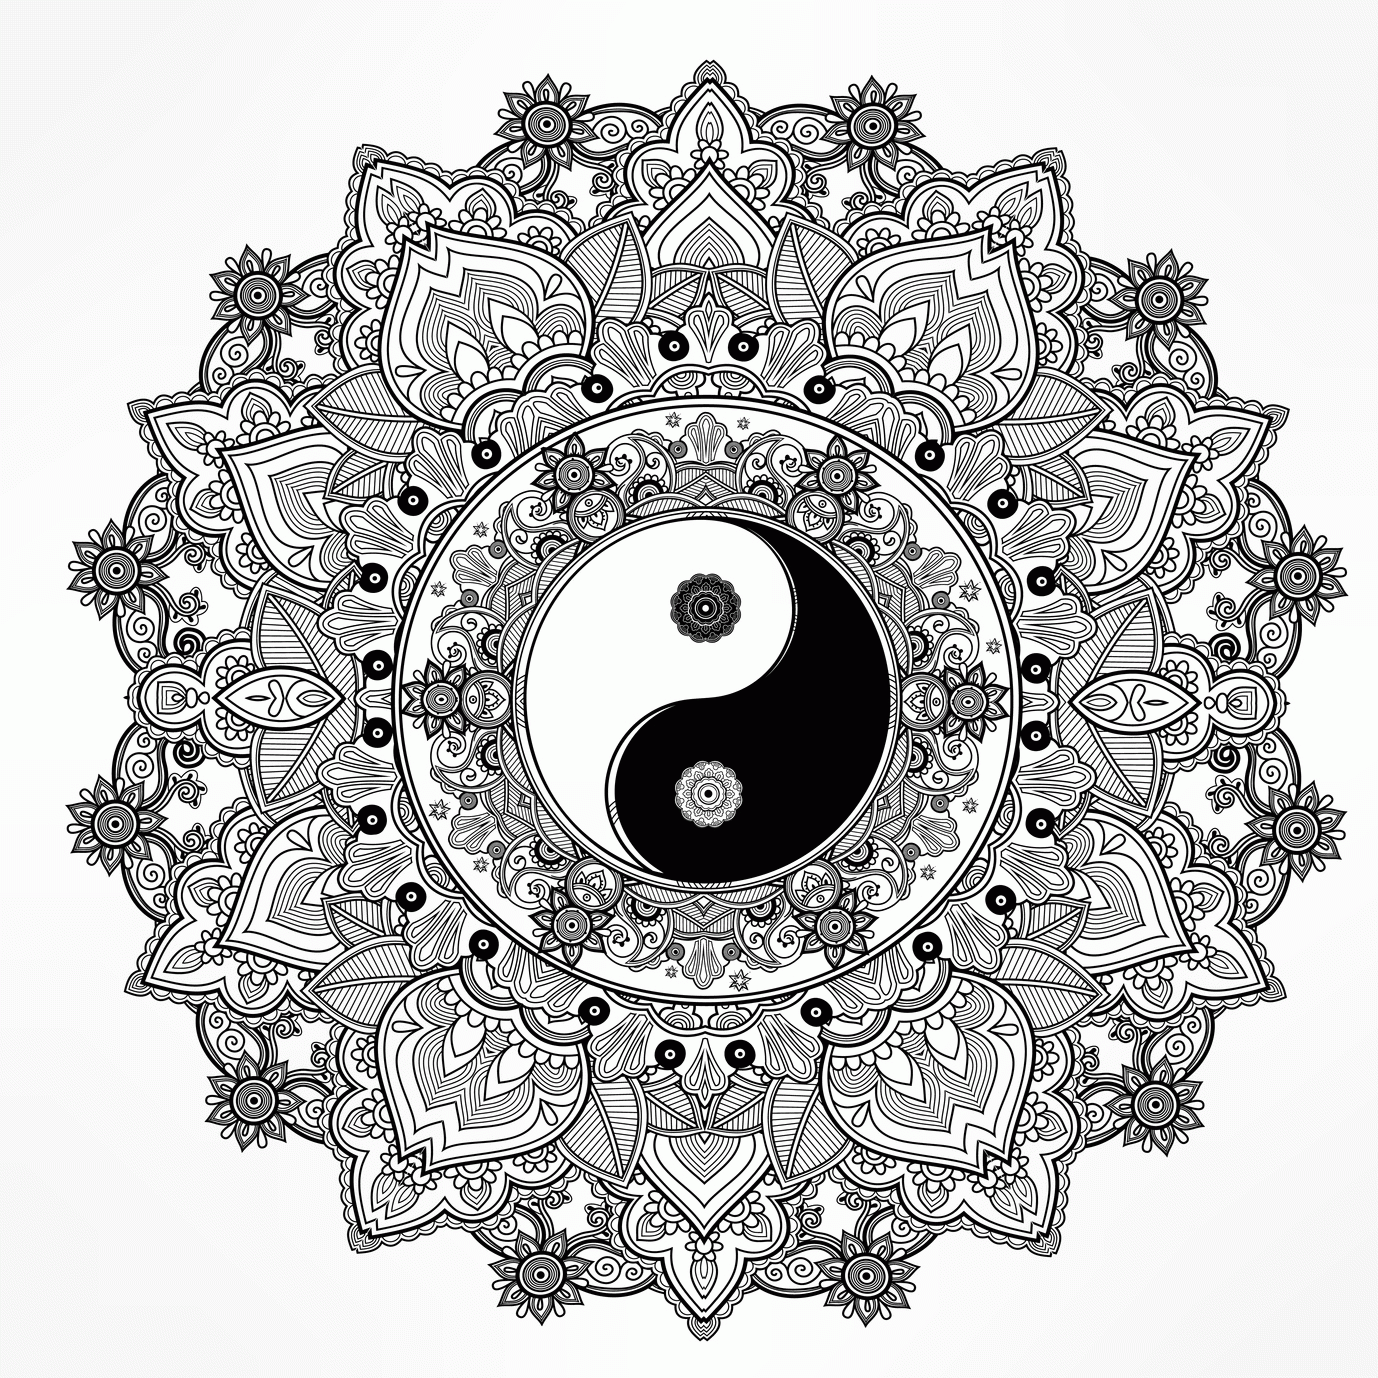 36 Best and Free Mandala Coloring Pages to Print - VoteForVerde.com